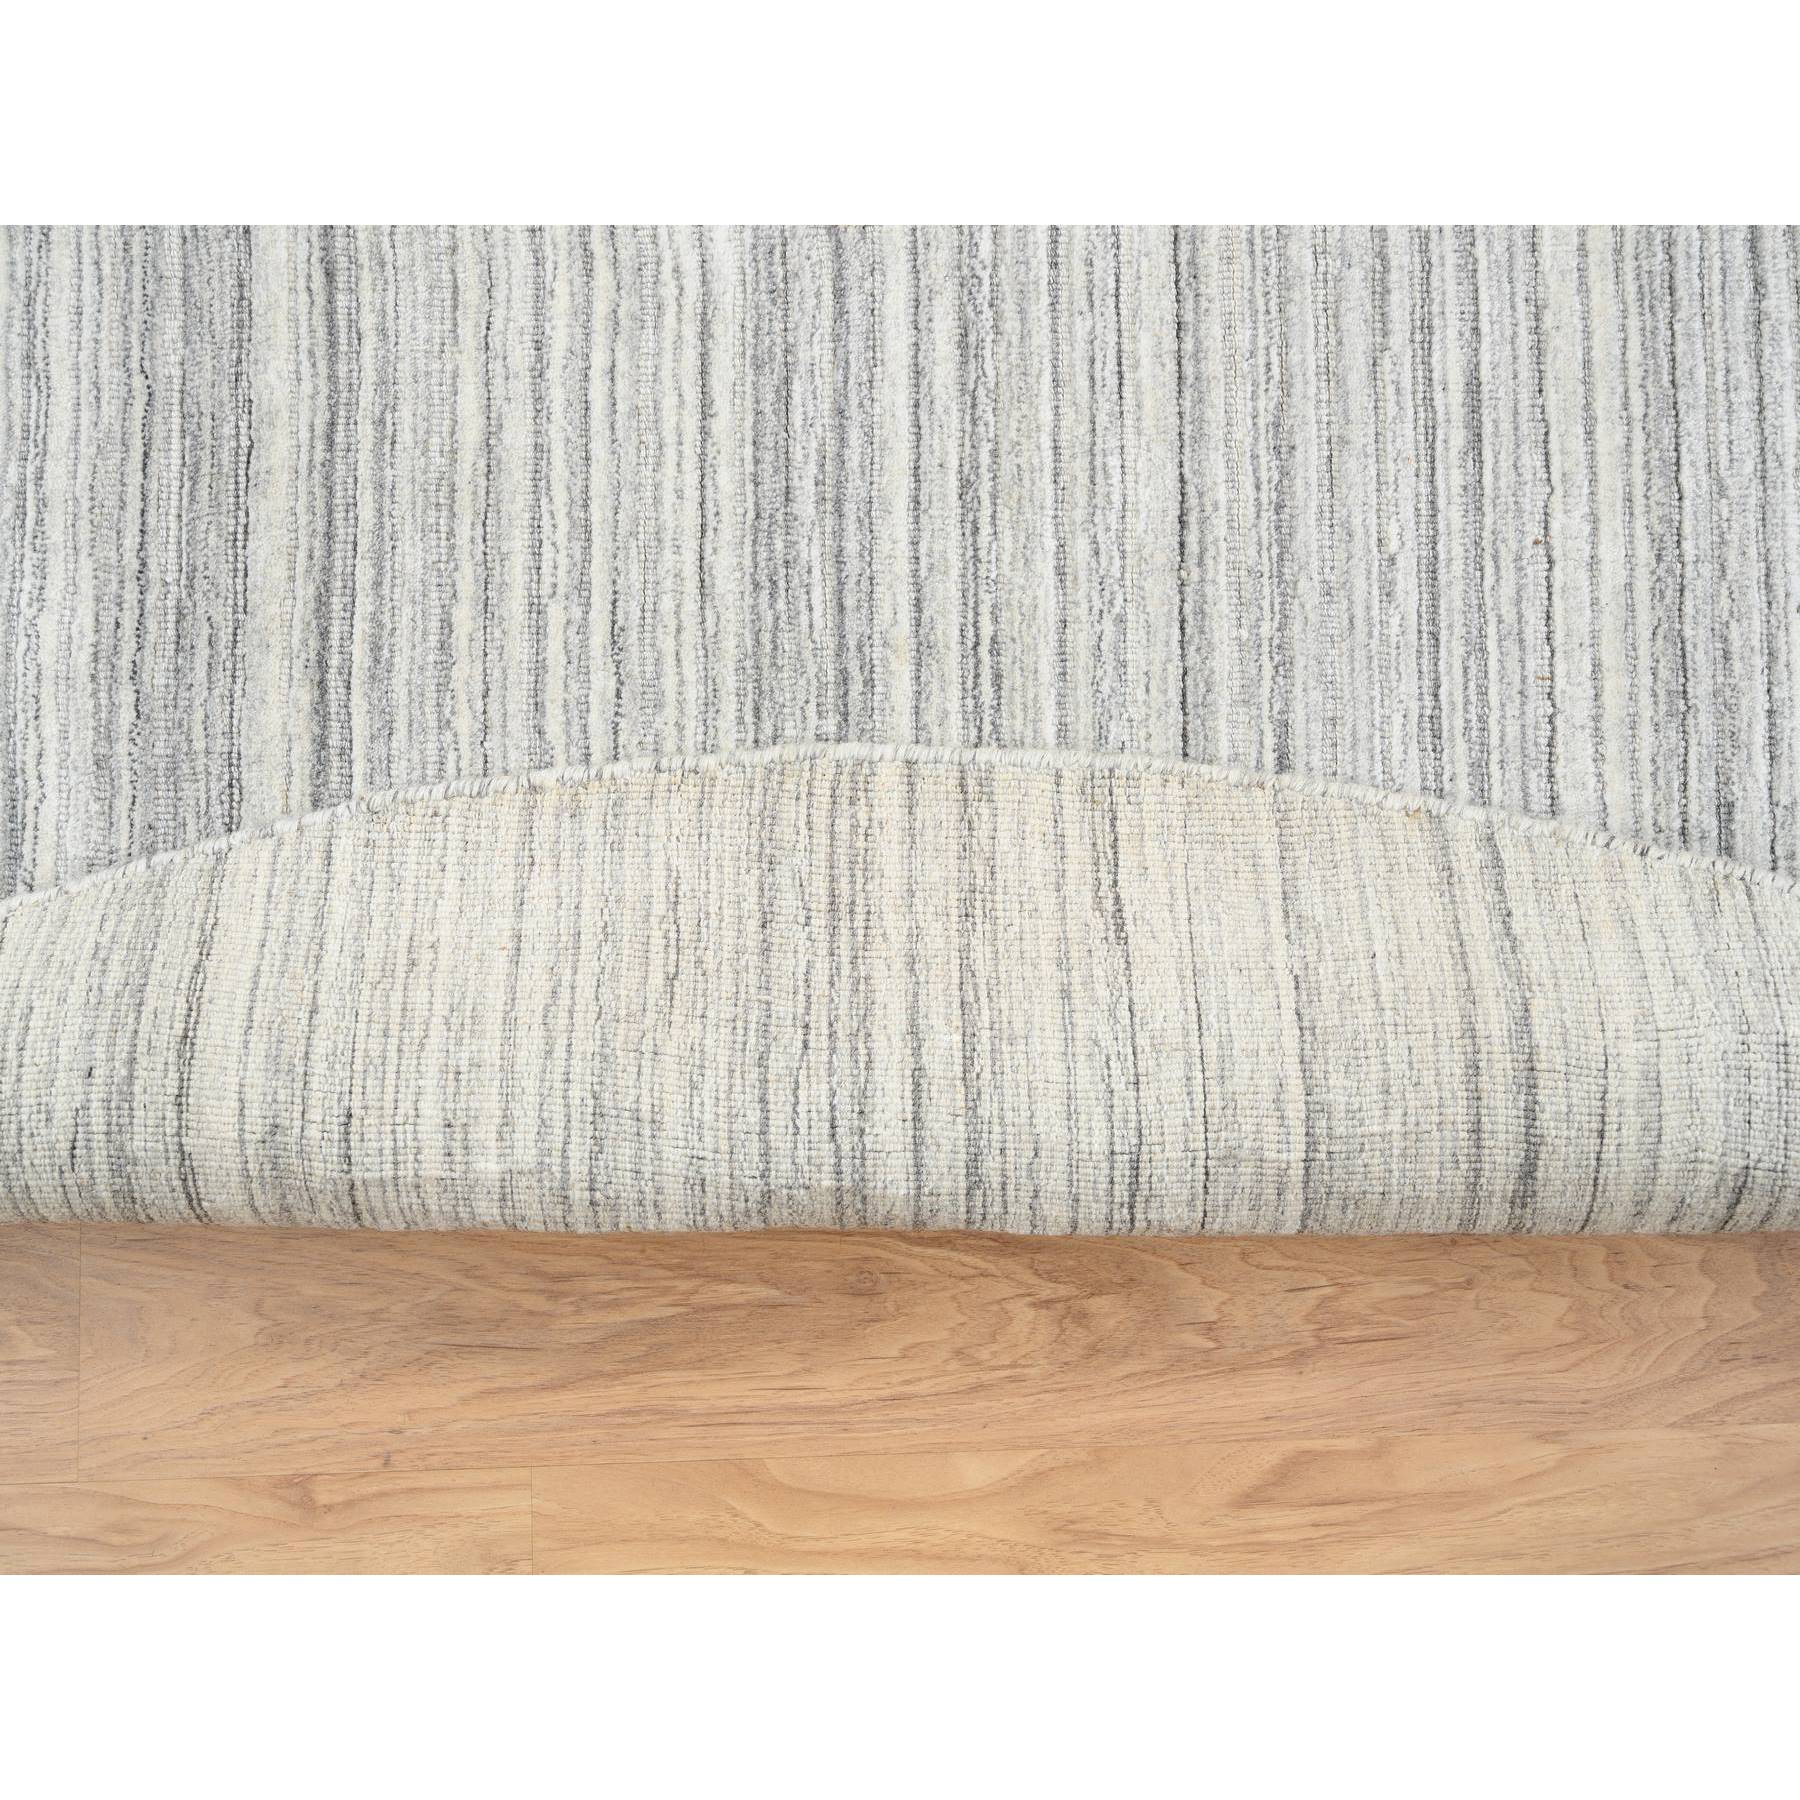 9'9"x9'9" Platinum Gray and Cream, Plain Hand Loomed Undyed Natural Wool, Modern Design Thick and Plush, Round Oriental Rug 